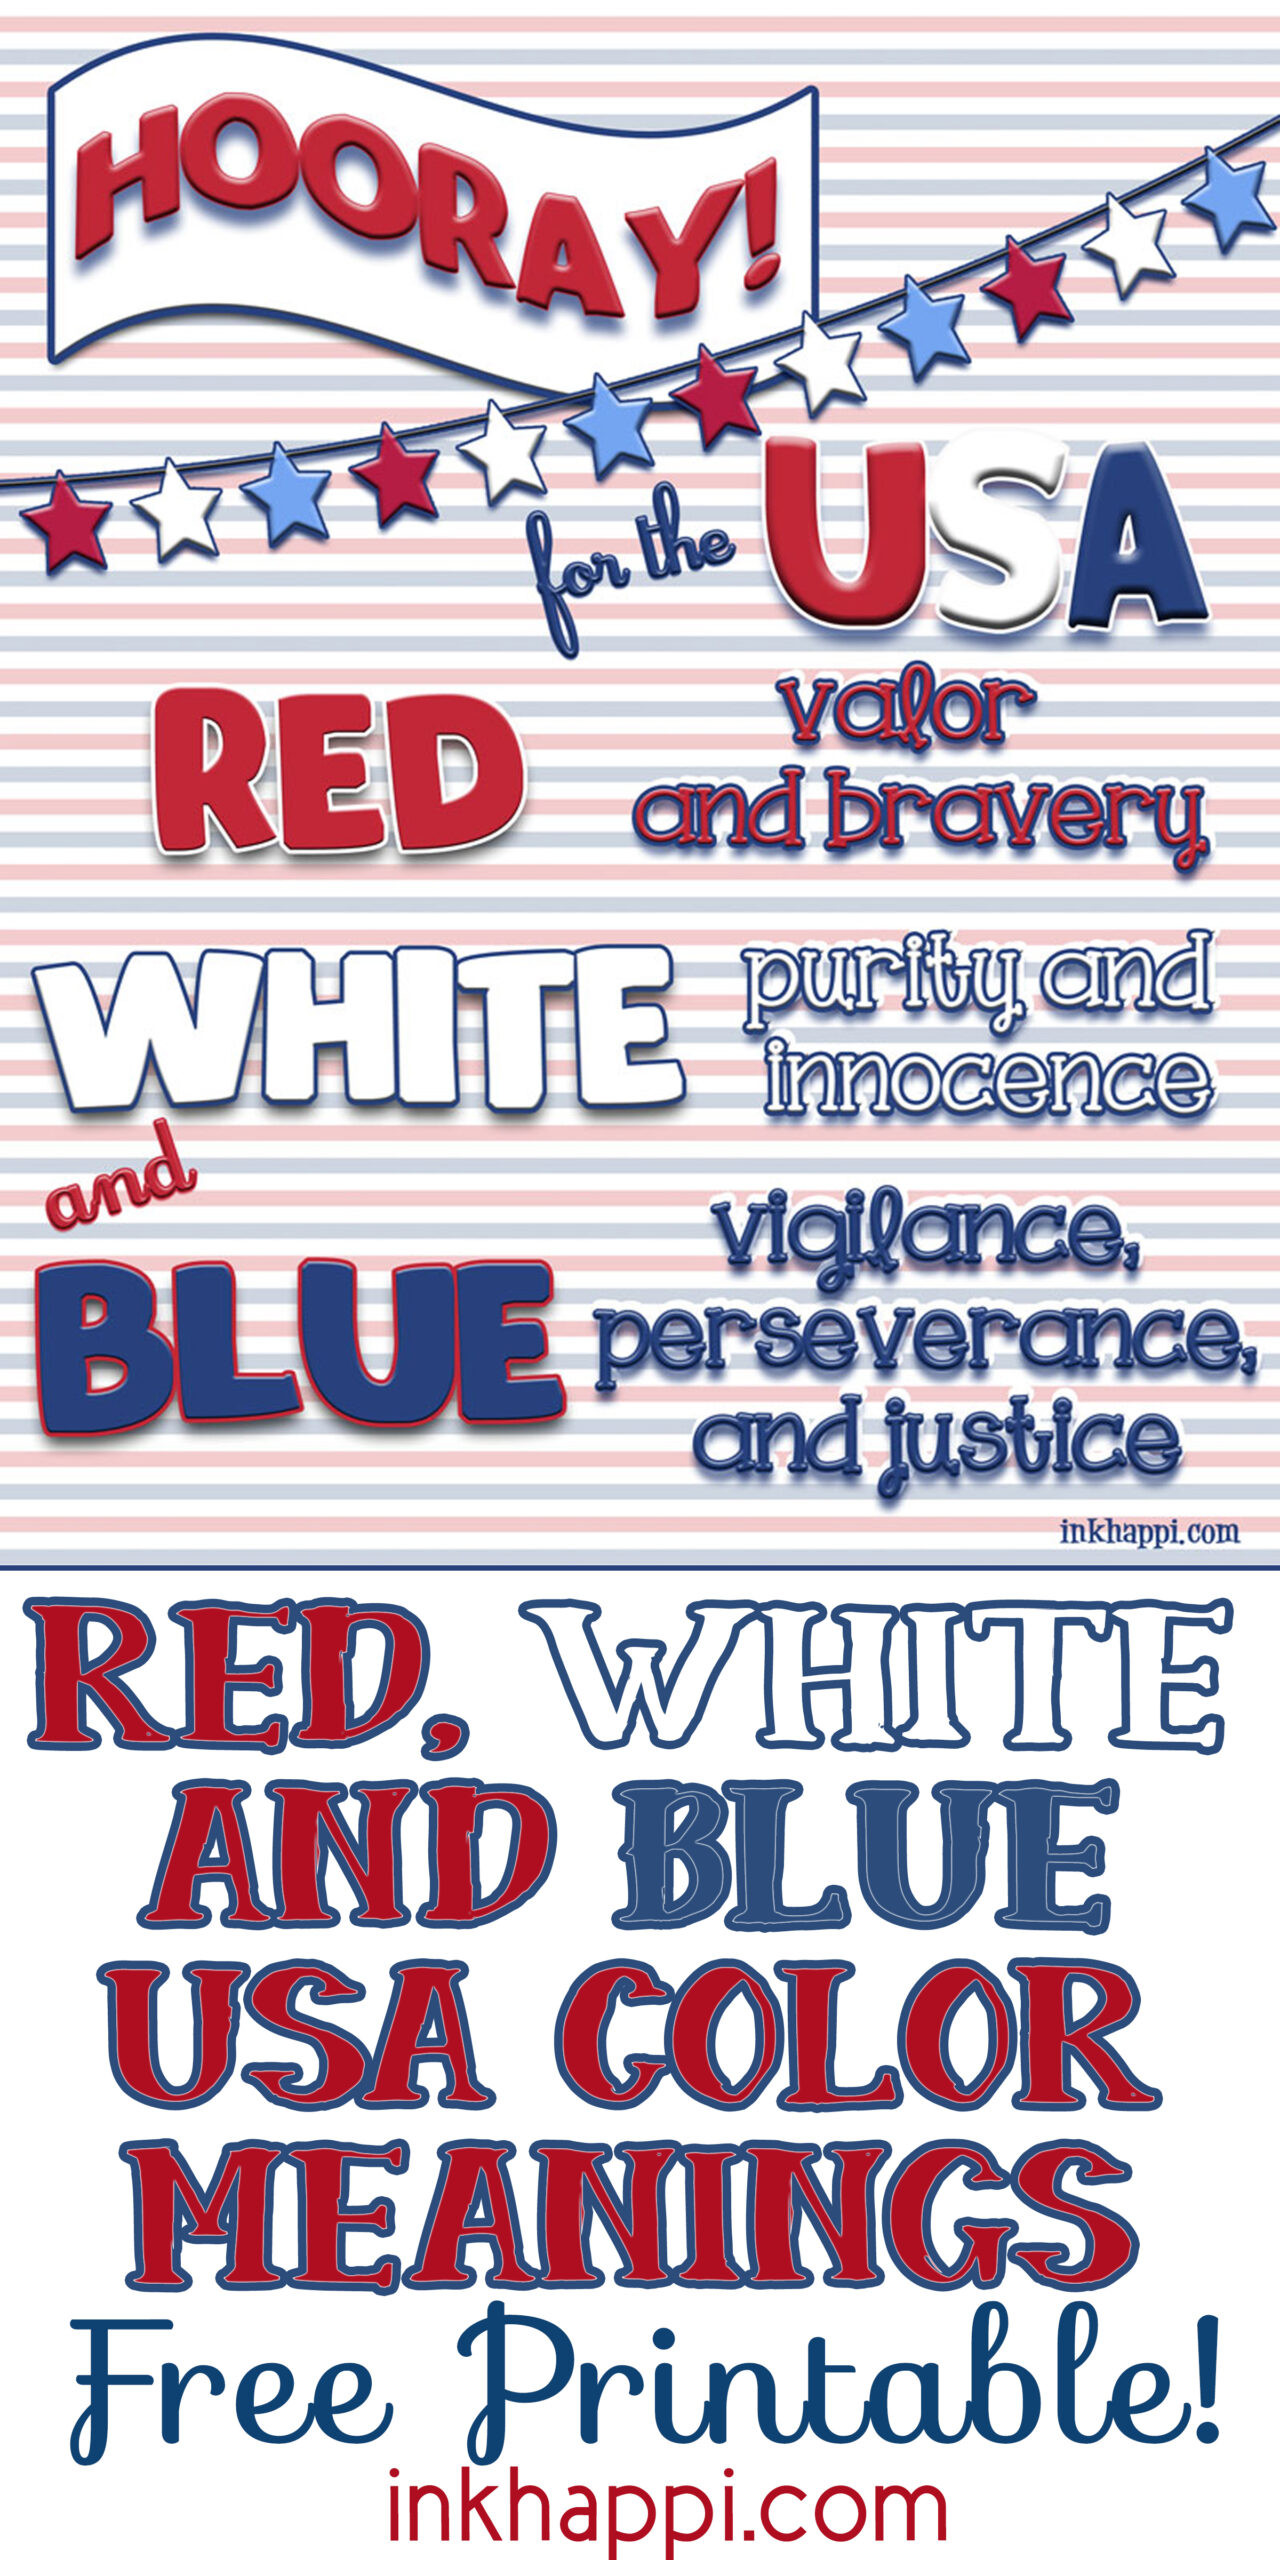 Red, White & Blue USA Colors Meaning {Free Printables} - inkhappi